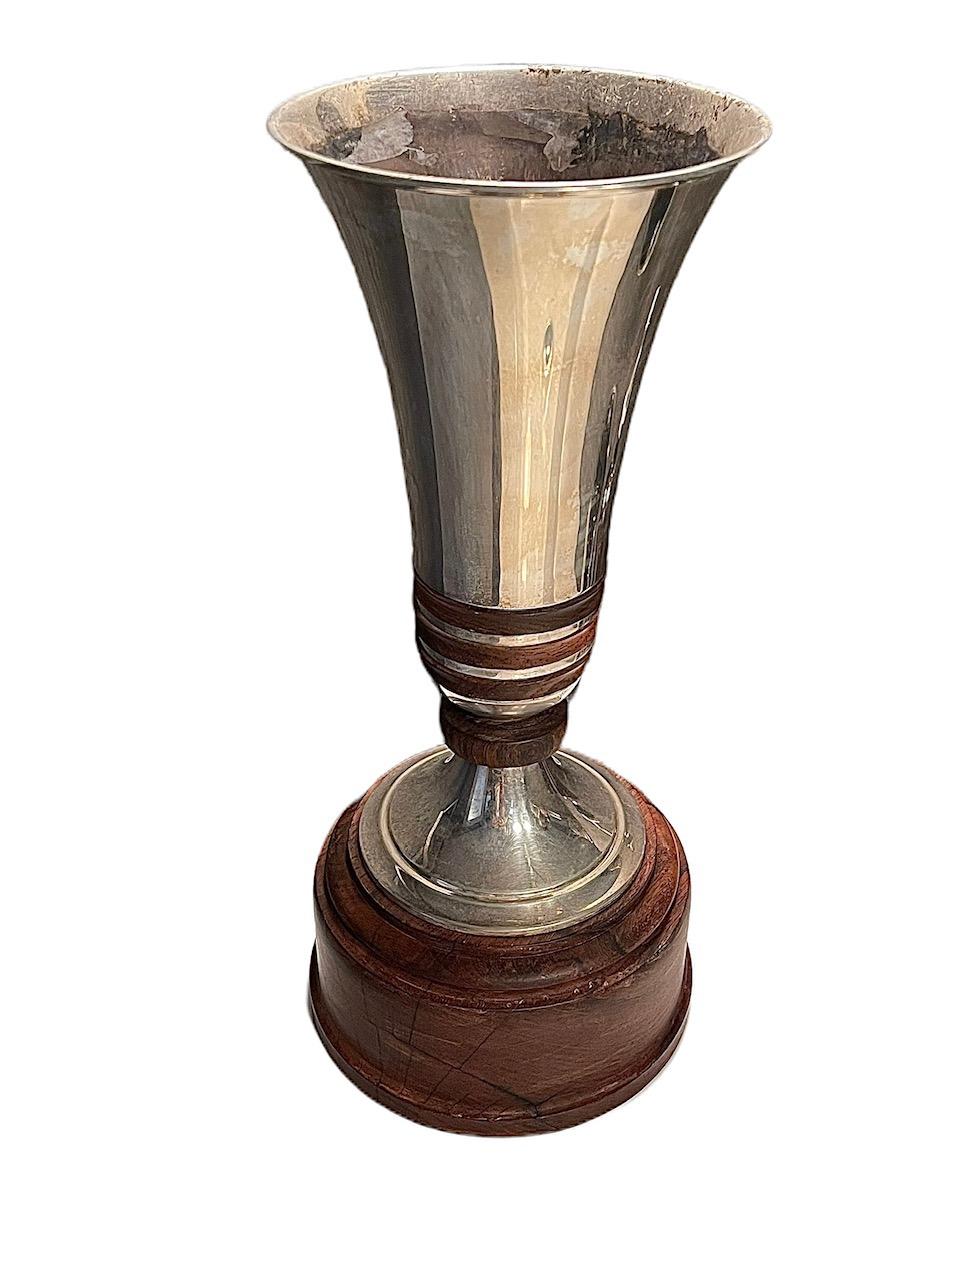 Hand-Carved Belgian Sterling Silver Vase on Wood Stand, by Brussels Wolfers, circa 1950 For Sale